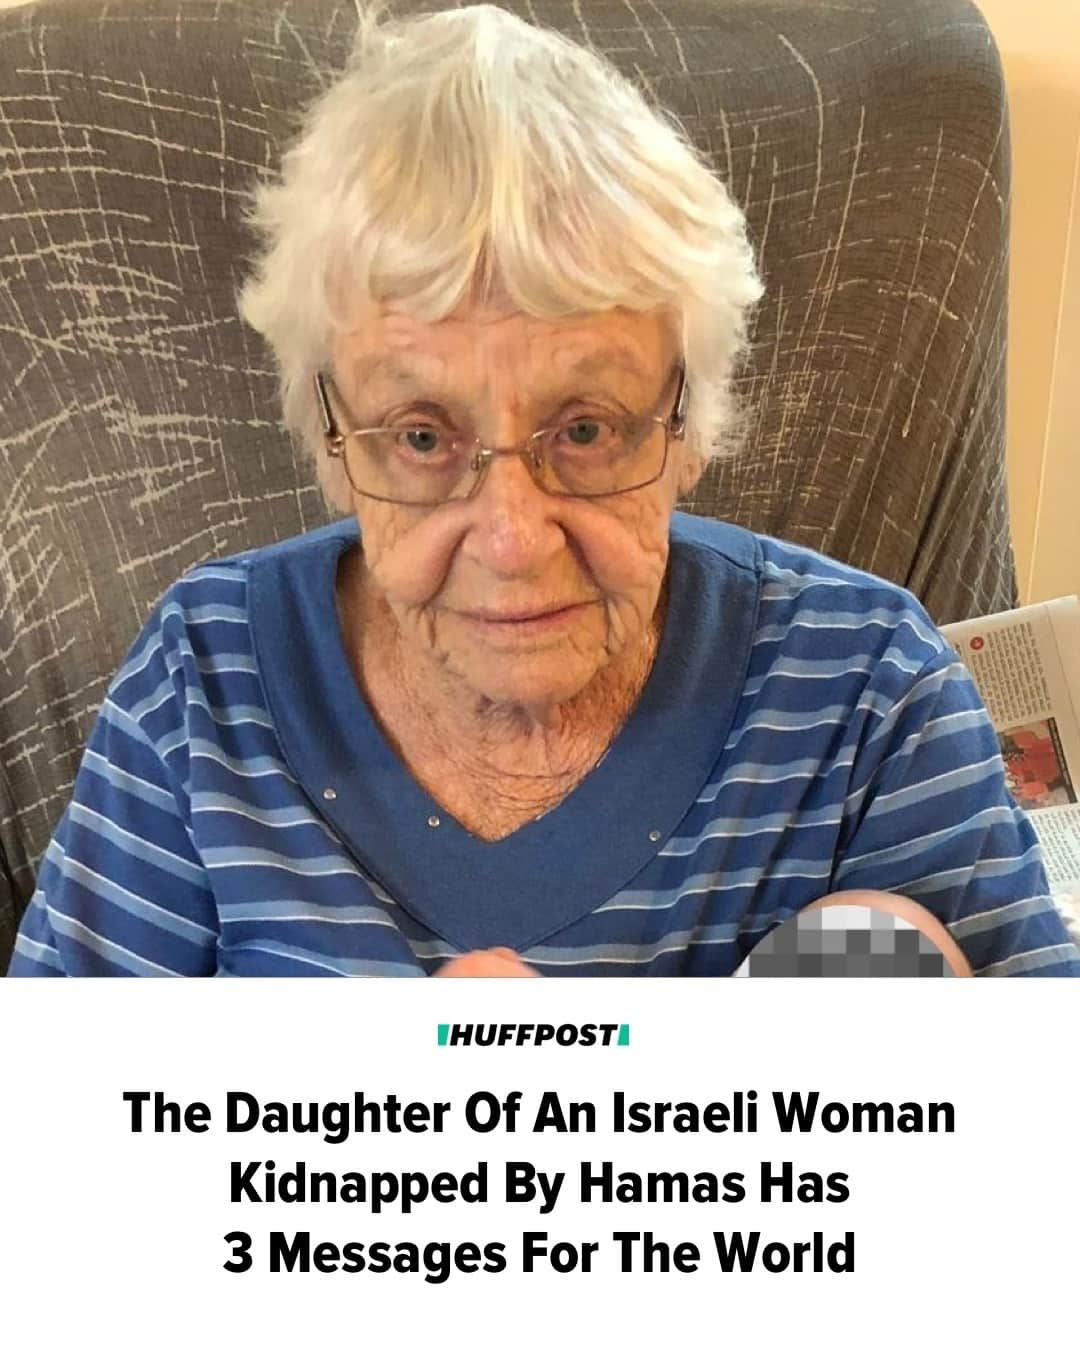 Huffington Postのインスタグラム：「When Neta Heiman last spoke to her 84-year-old mother, Ditza, her kibbutz was under fire amid the bloodiest assault on Israel in 50 years. Heiman has since learned Ditza was kidnapped by the Palestinian militant group Hamas and taken into the Gaza Strip ― and she is determined to give the world three messages.⁠ ⁠ Governments worldwide should push to make sure the Hamas hostages get their medication, Heiman told HuffPost on Thursday, noting that most residents of her mother’s community were elderly people she has known “from the day I was born.”⁠ ⁠ Heiman also wants global help for those detainees to be returned to their families.⁠ ⁠ And she believes the U.S. must apply pressure to solve the Israeli-Palestinian dispute for good.⁠ ⁠ “I hope the international community will help,” Heiman said. “This would be in the interests of everyone.”⁠ ⁠ Heiman is worried her mother could be affected by Israel’s ongoing bombardment of Gaza, a narrow, tightly packed sliver of land. Israeli airstrikes have repeatedly hit residential neighborhoods there, killing more than 1,500 people, and Israeli Prime Minister Benjamin Netanyahu appears to be preparing a ground invasion. The Israeli military on Friday ordered the evacuation of northern Gaza, which is home to over 1 million Palestinians, in what the U.N. described as an “impossible” task to carry out without “devastating humanitarian consequences.”⁠ ⁠ “They are bombing Gaza, and we don’t know where she is and where all the people are,” Heiman said, referring to the scores of other hostages. “They may not be in one place.”⁠ ⁠ Heiman published an essay in the Israeli newspaper Haaretz on Thursday describing how her anger has multiple targets: her mother’s kidnappers but also Israeli politicians whom she blames for not doing enough to support hostages’ families and for failing to establish peace with the Palestinians.⁠ ⁠ Read more at our link in bio. // 📷 Courtesy of Neta Heiman // 🖊️ Akbar Shahid Ahmed and Marita Vlachou」